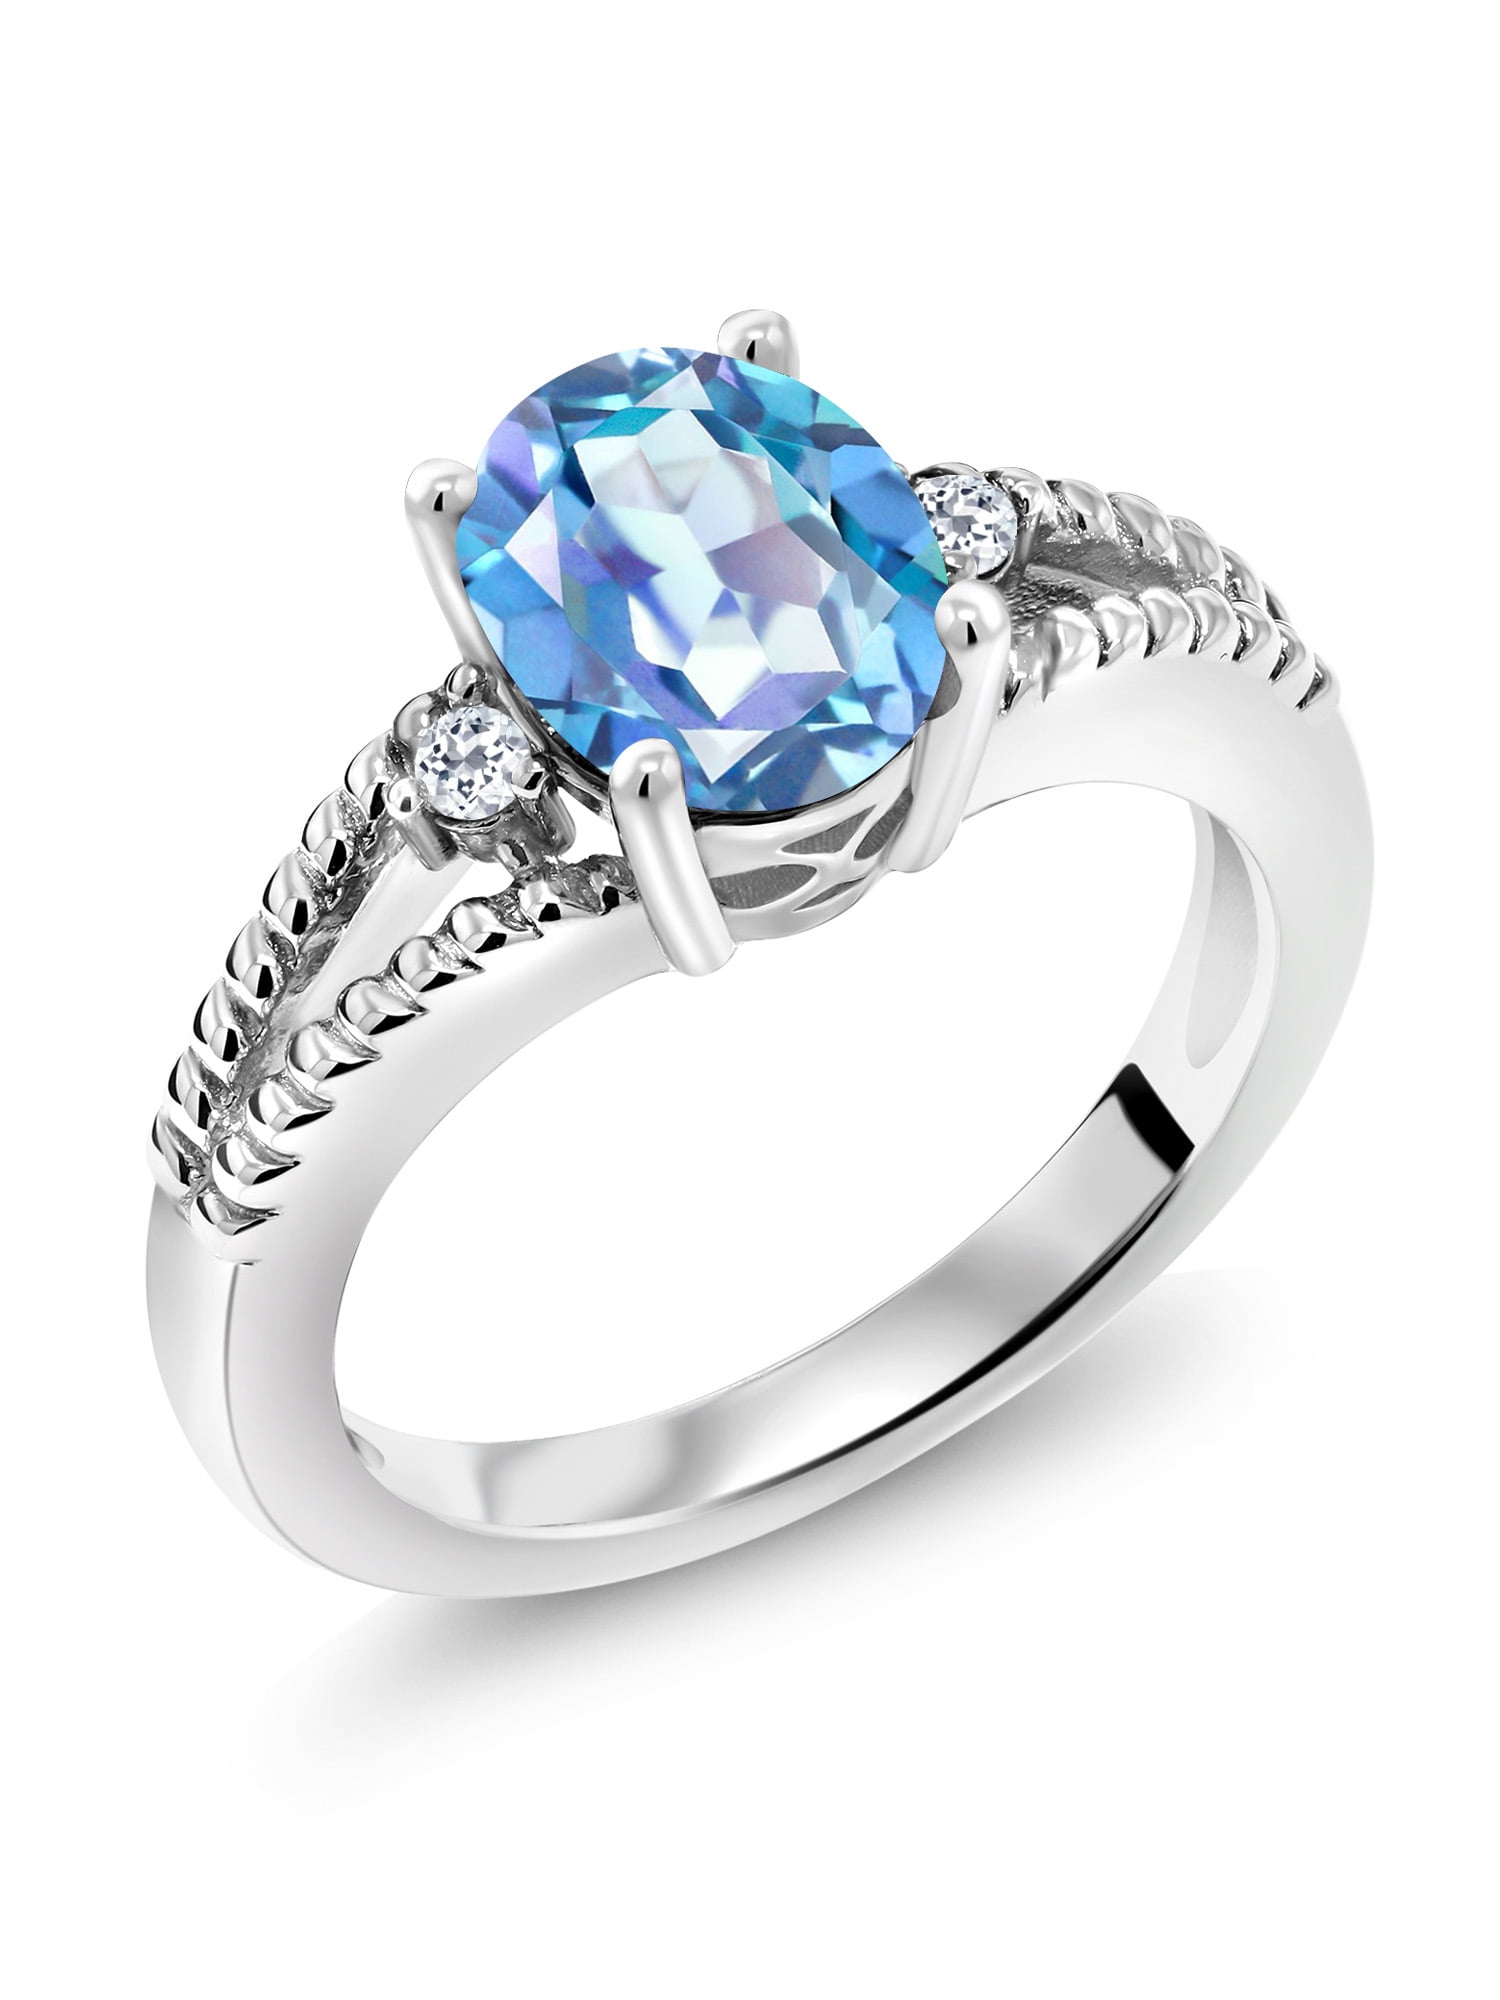 Solid 925 Sterling Silver Jewelry 2.52 Ct Stunning Oval Millennium Blue Mystic Topaz Ring Available in size 5, 6, 7, 8, 9